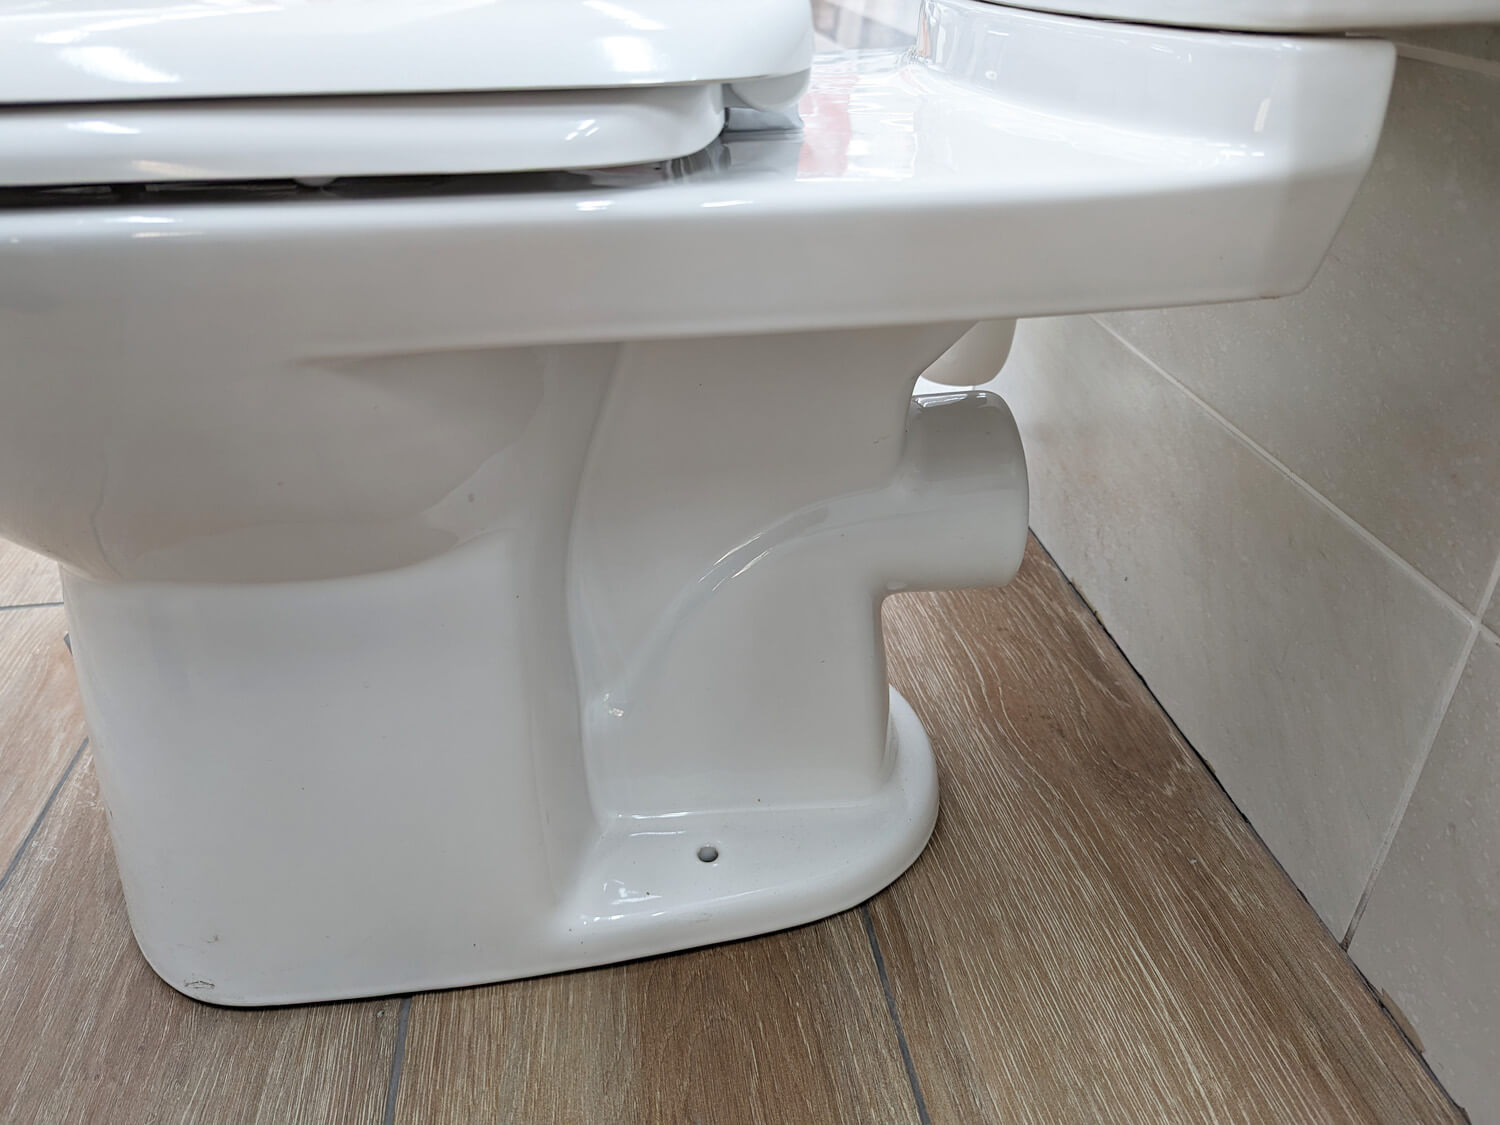 COTTO Marilyn White Dual Top Flush Toilet Suite